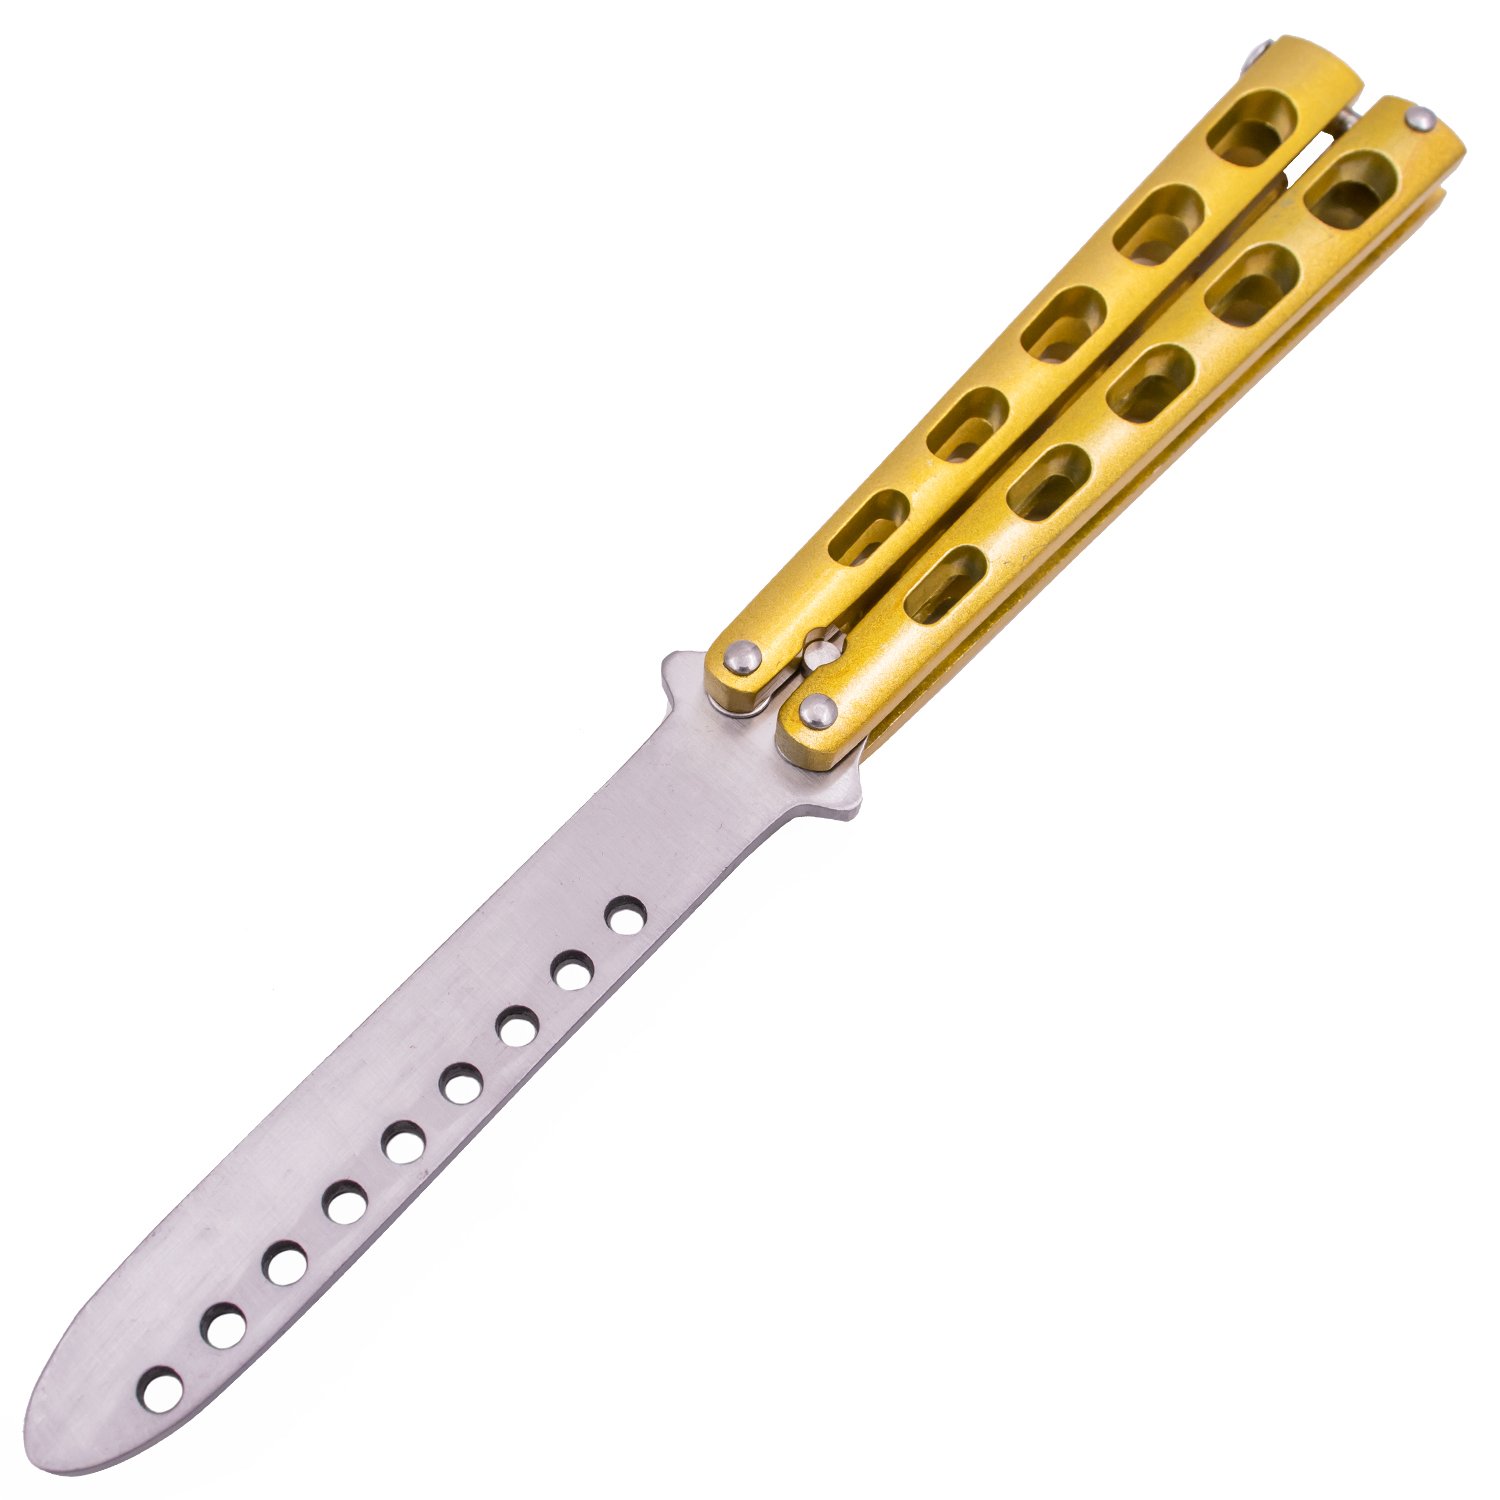 Tiger USA Butterfly Training Knife 440 Stainless 8.85 Inch   Gold Picture 1